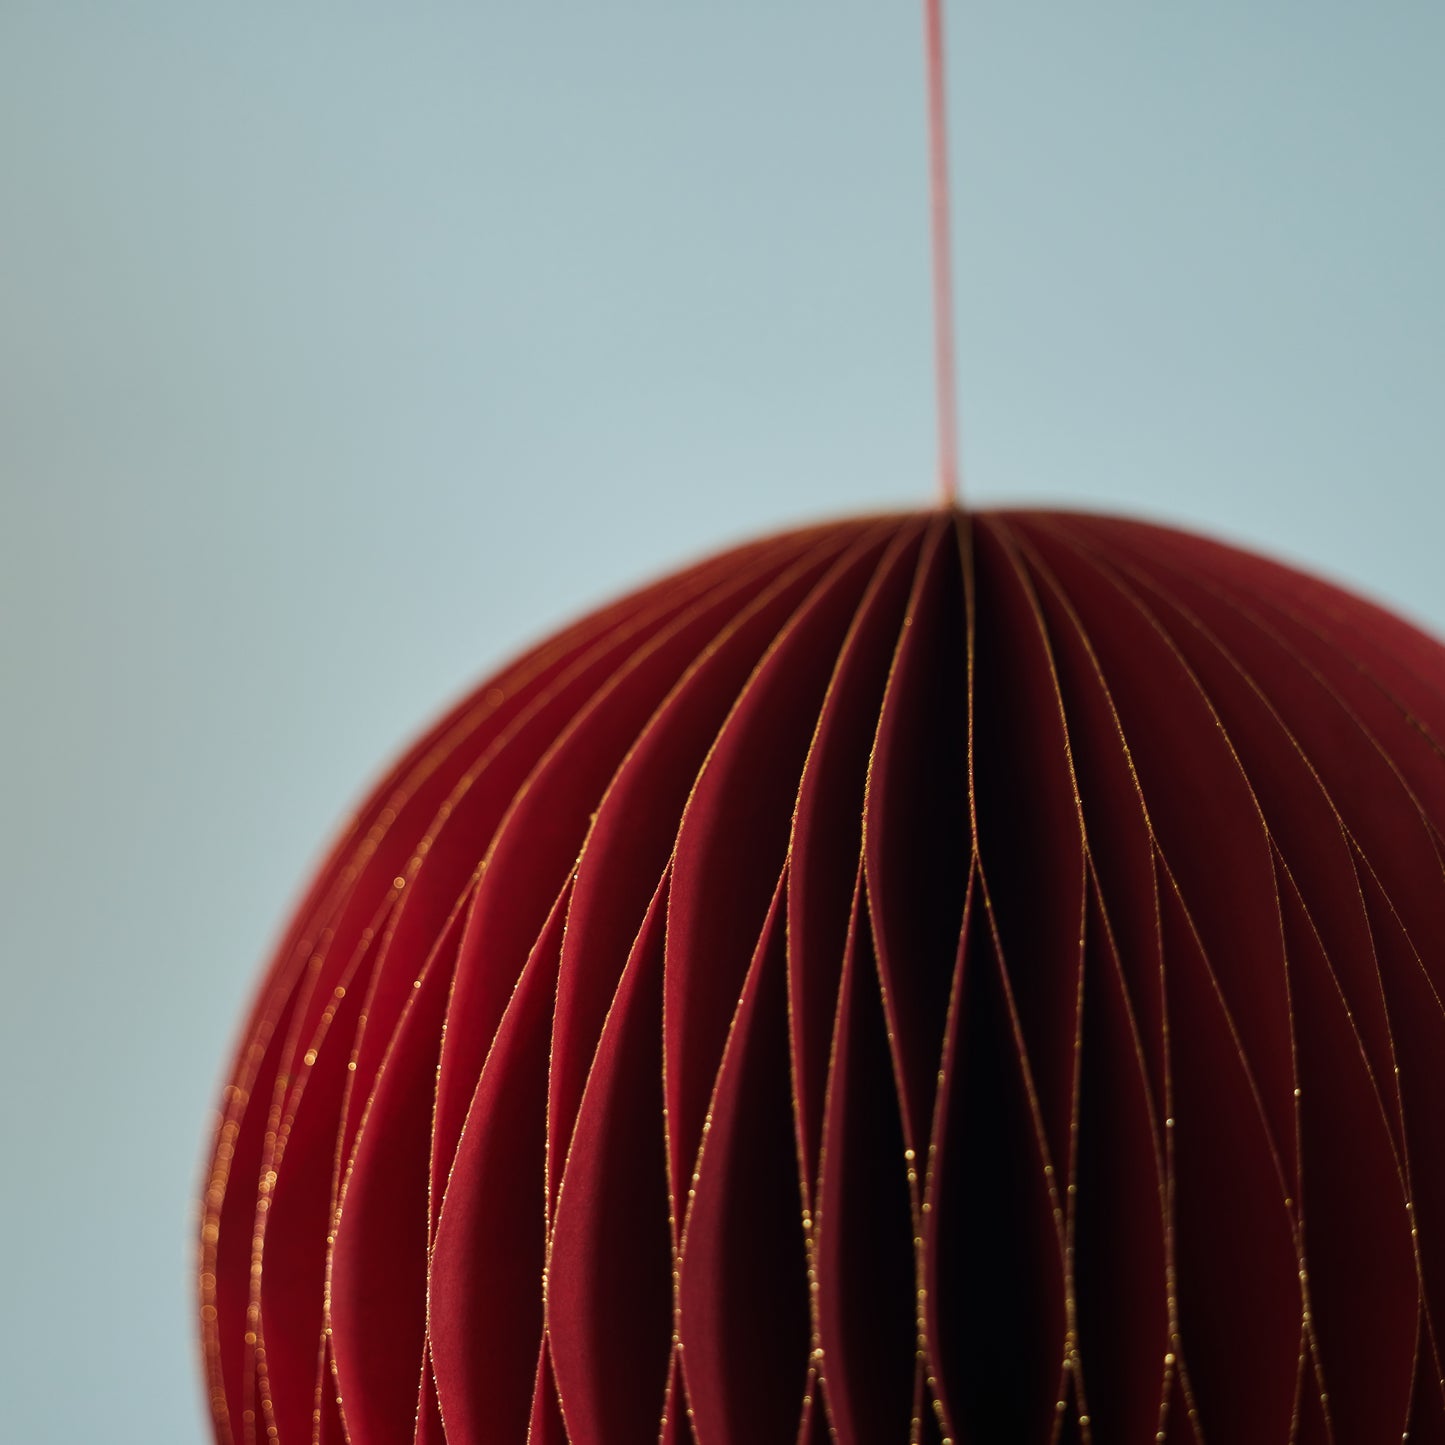 Red Honeycomb Ball Ornament